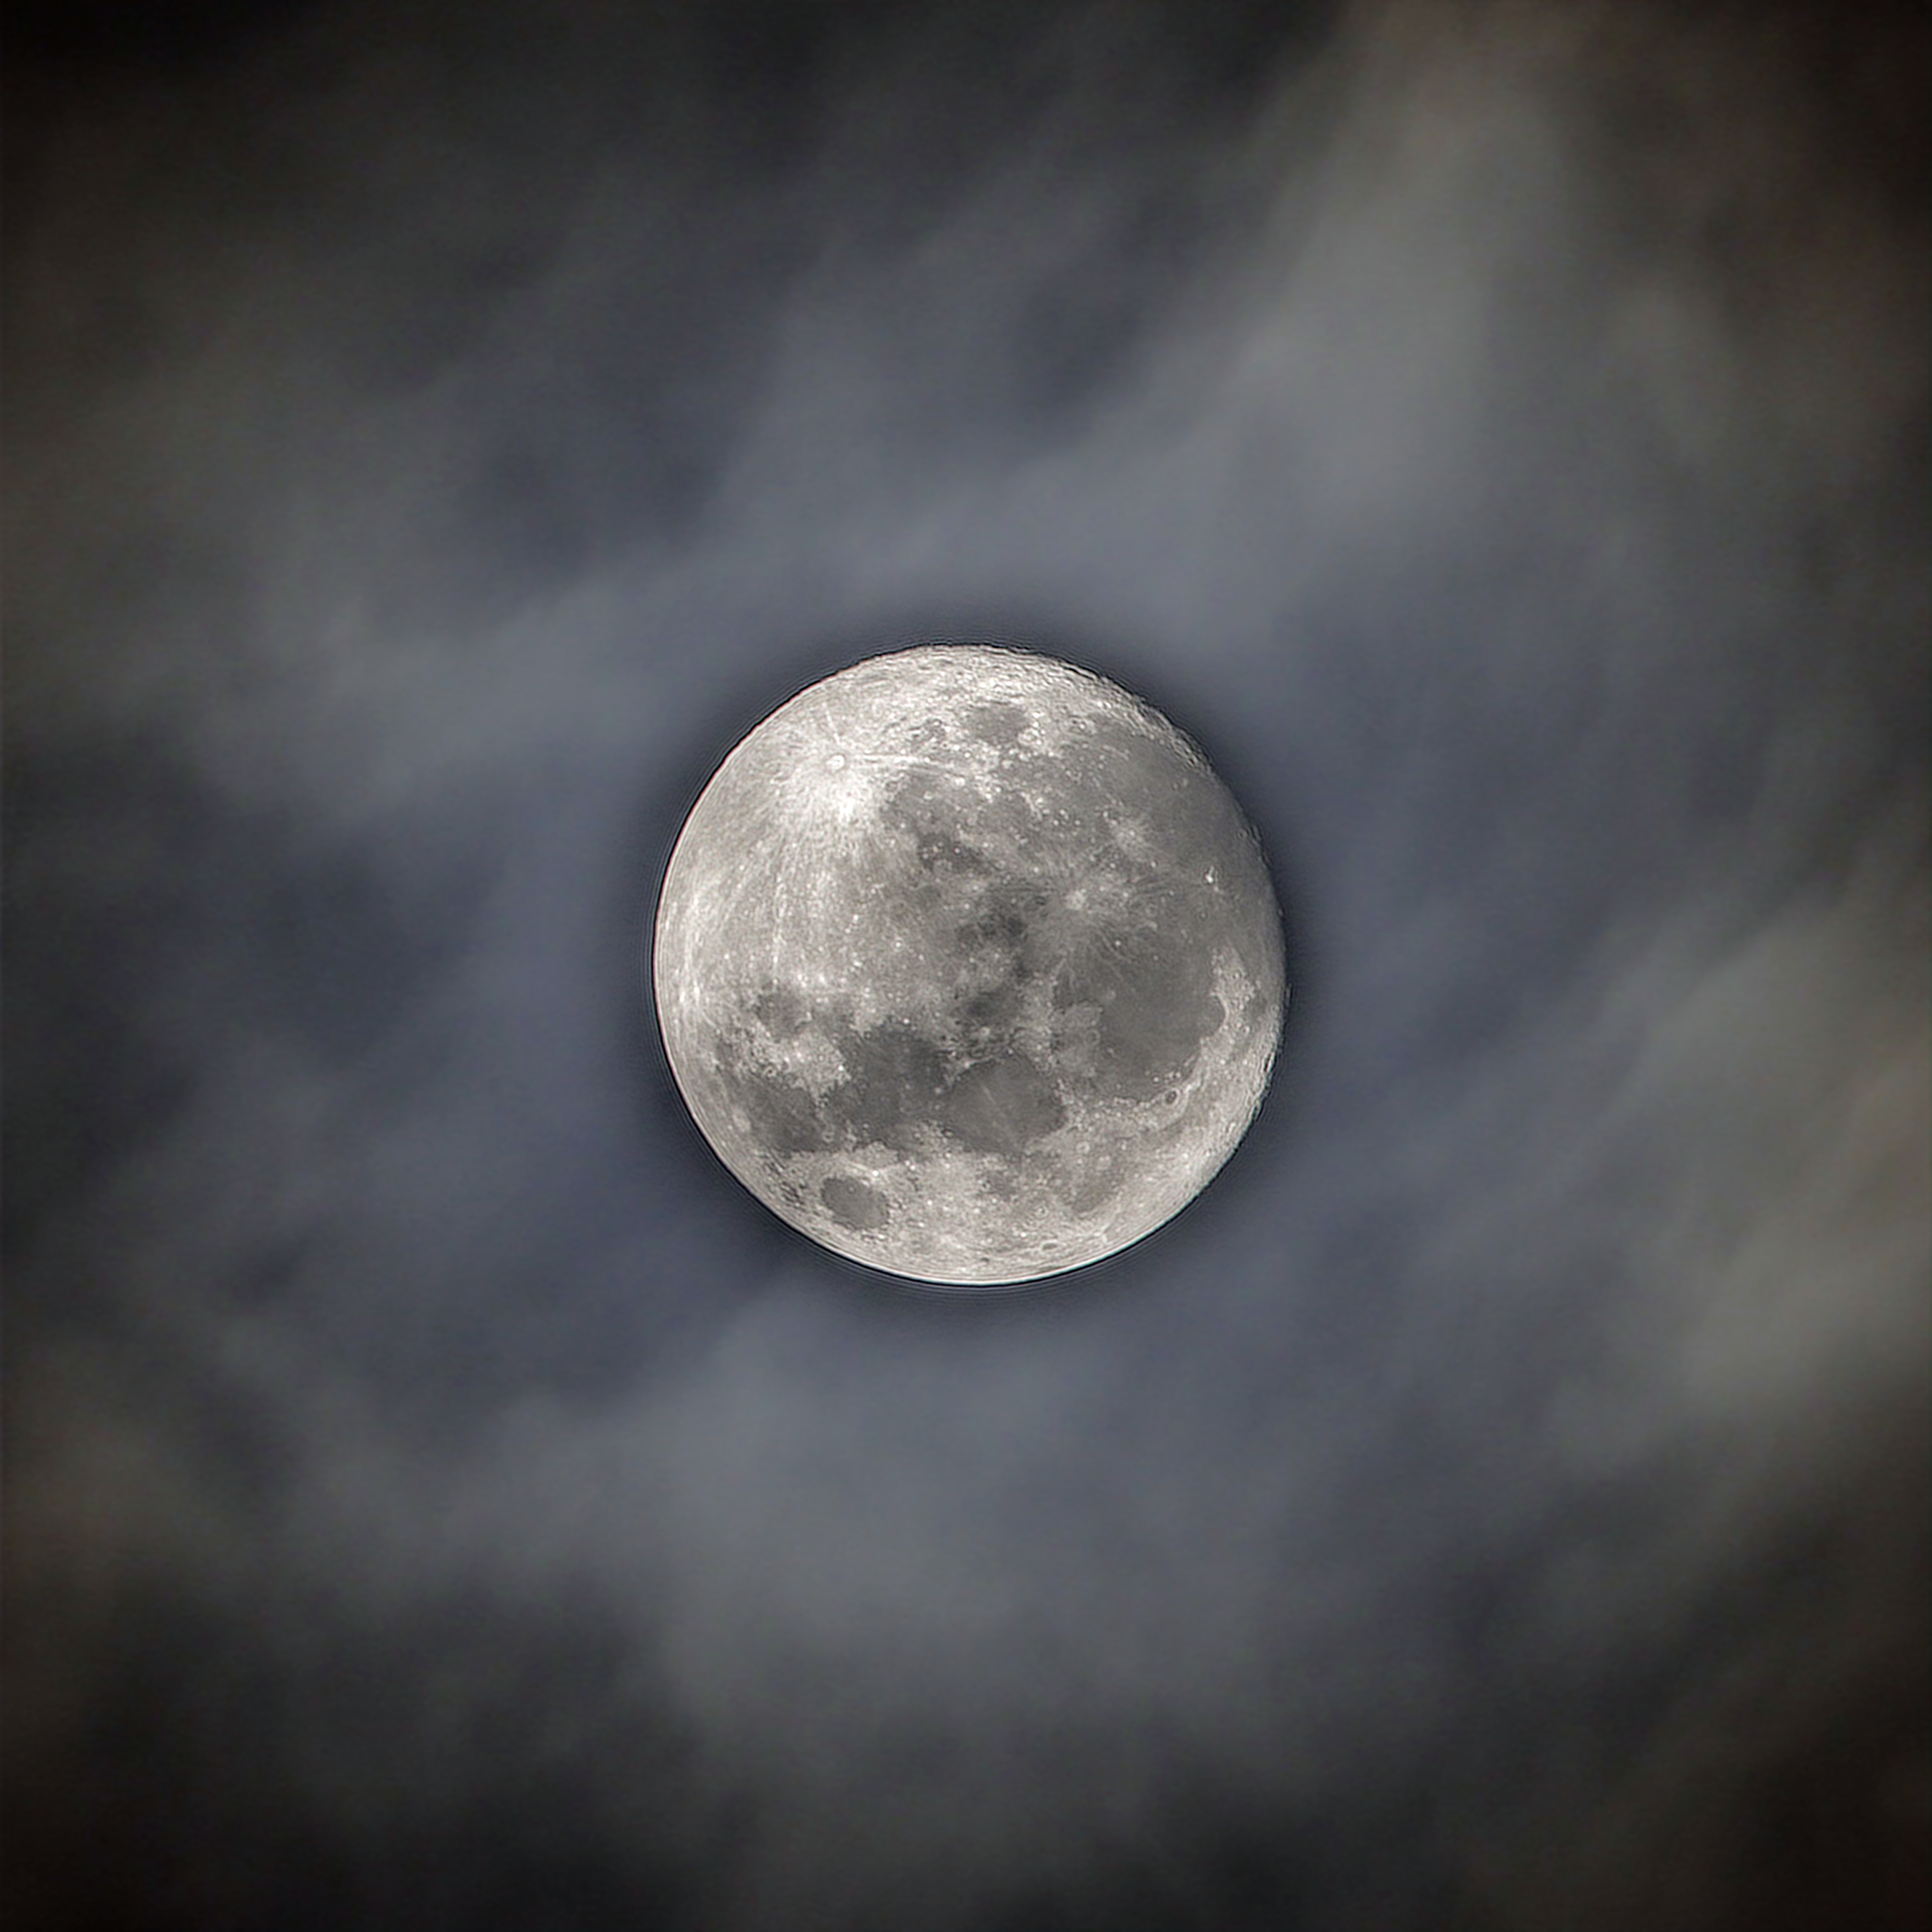 A cloudy moon in Newport shot with William Optics Redcat 71